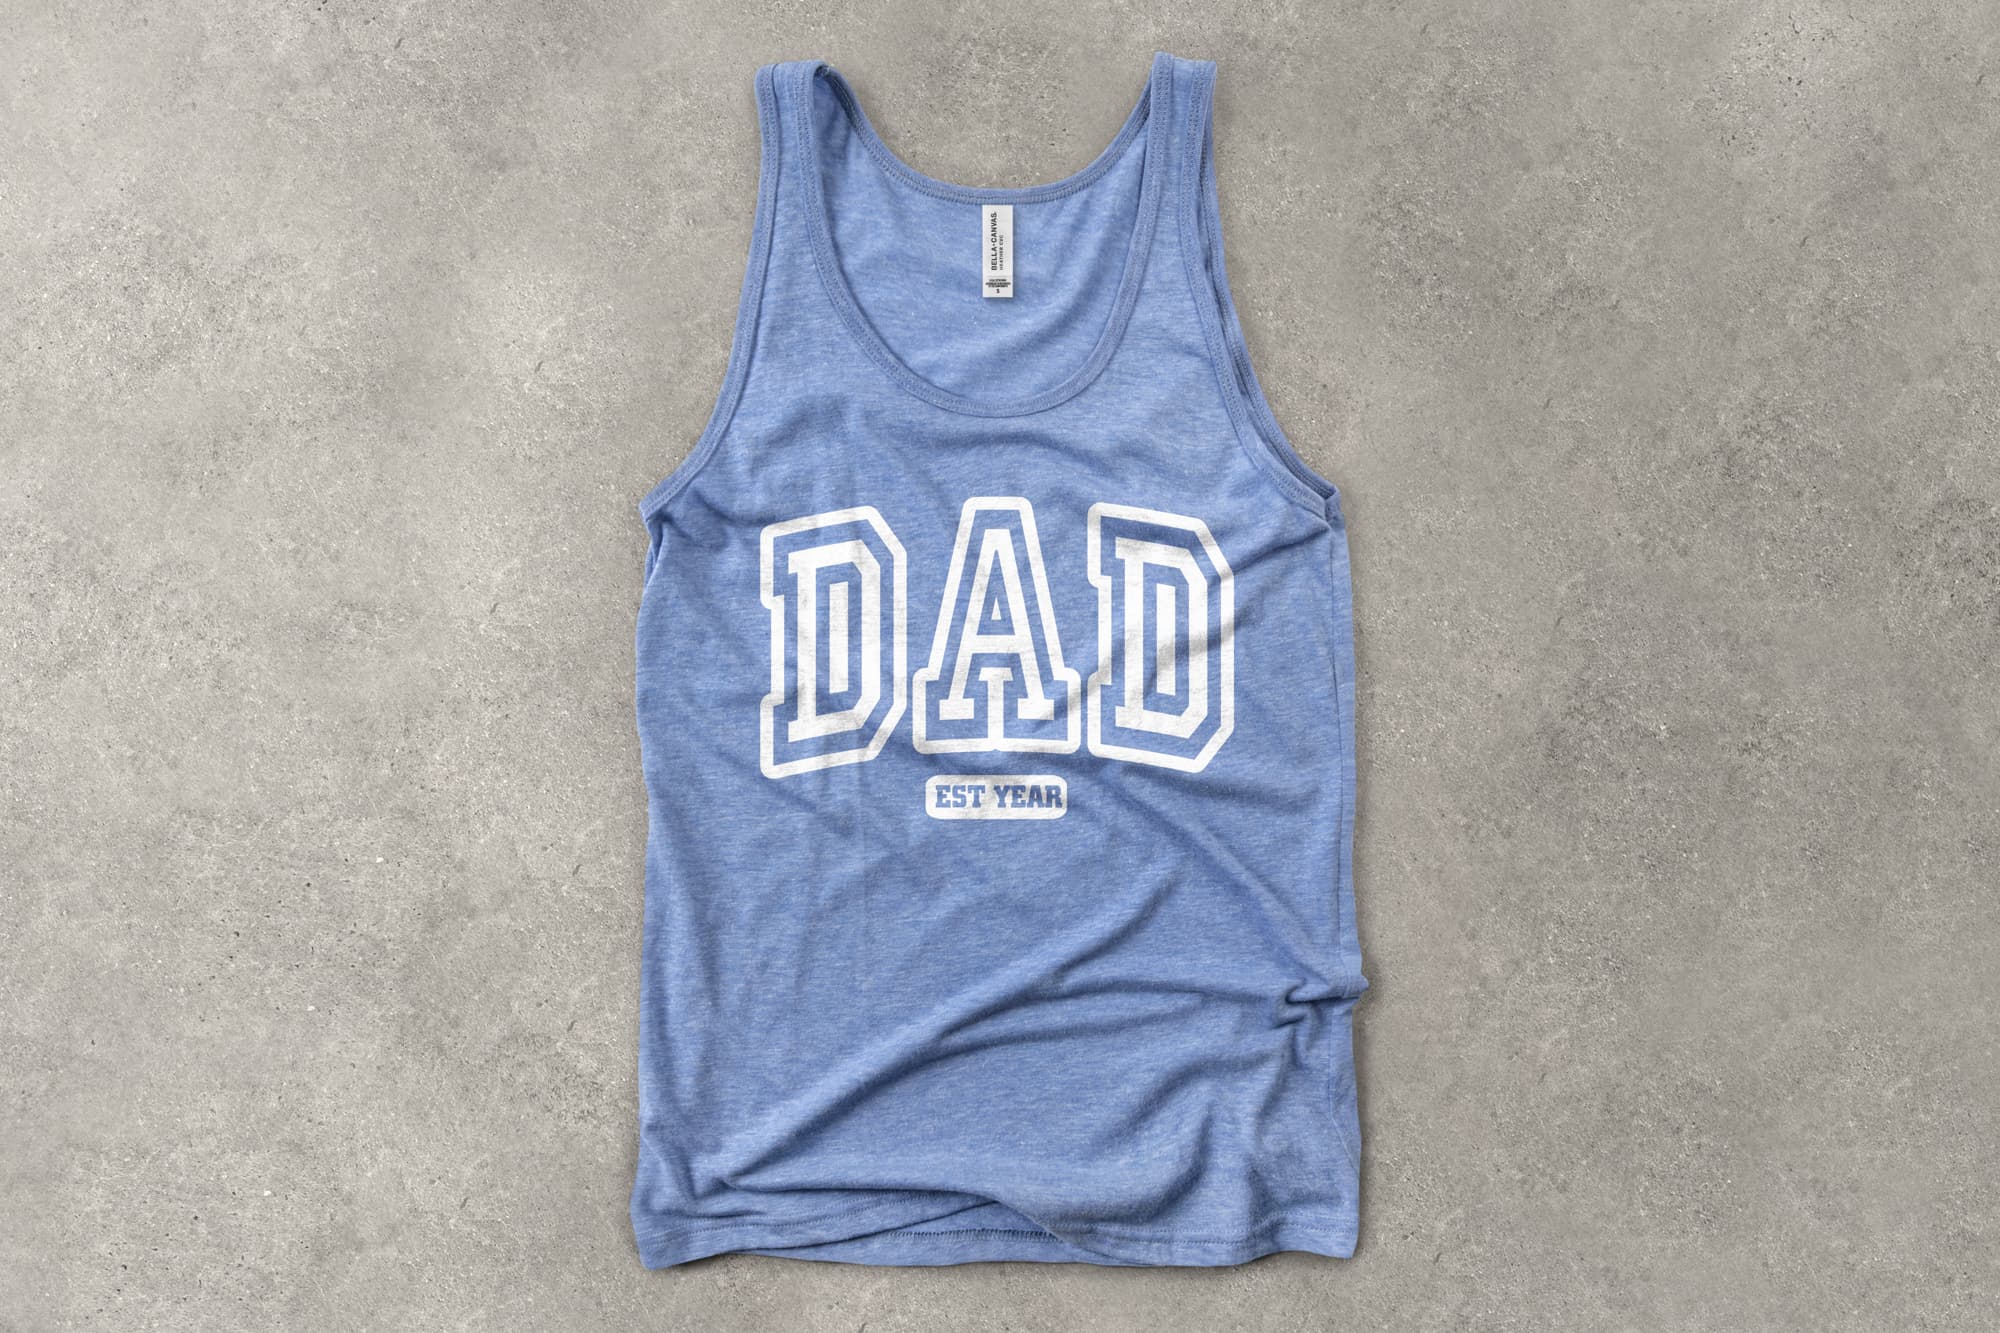 A flat tank top shirt that has a simple customizable design that says "Dad - est year" in all caps.